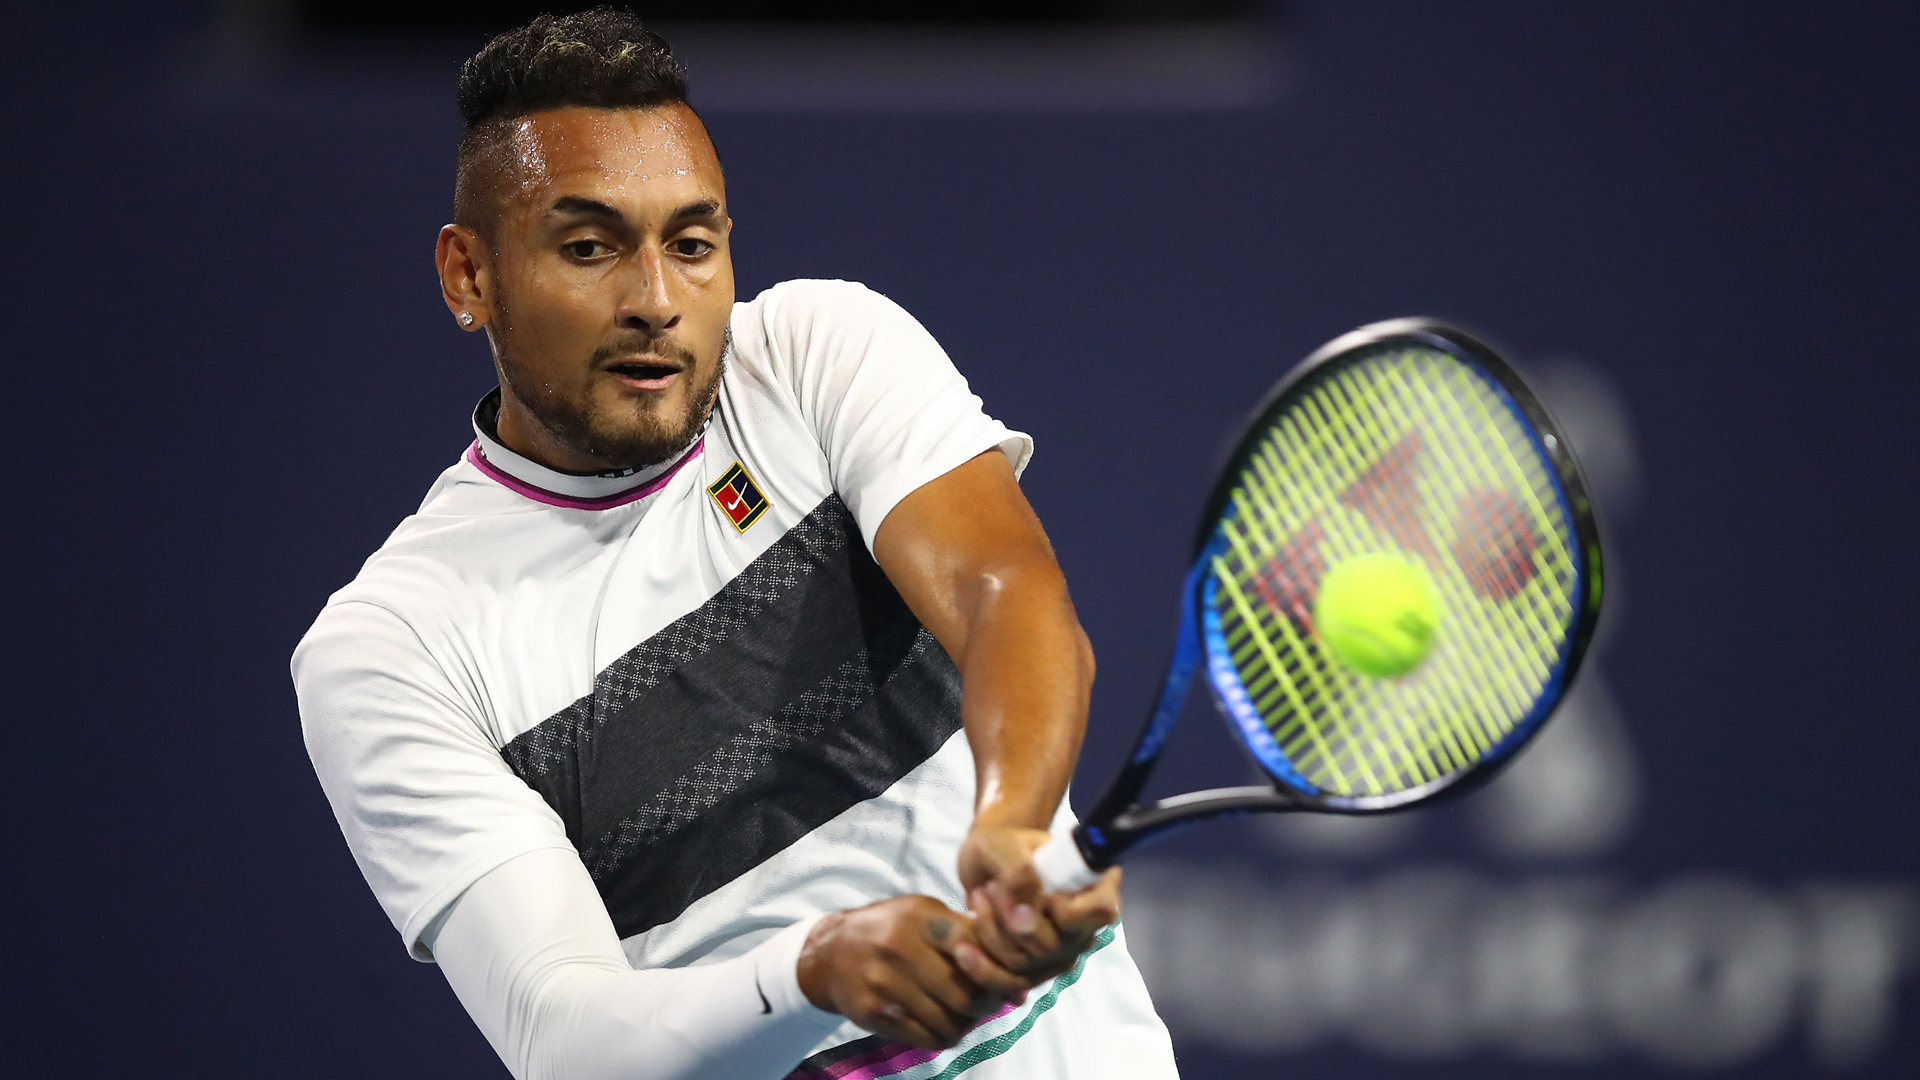 Nick Kyrgios and Borna Coric will meet in the Miami Open last 16 after contrasting third-round wins.